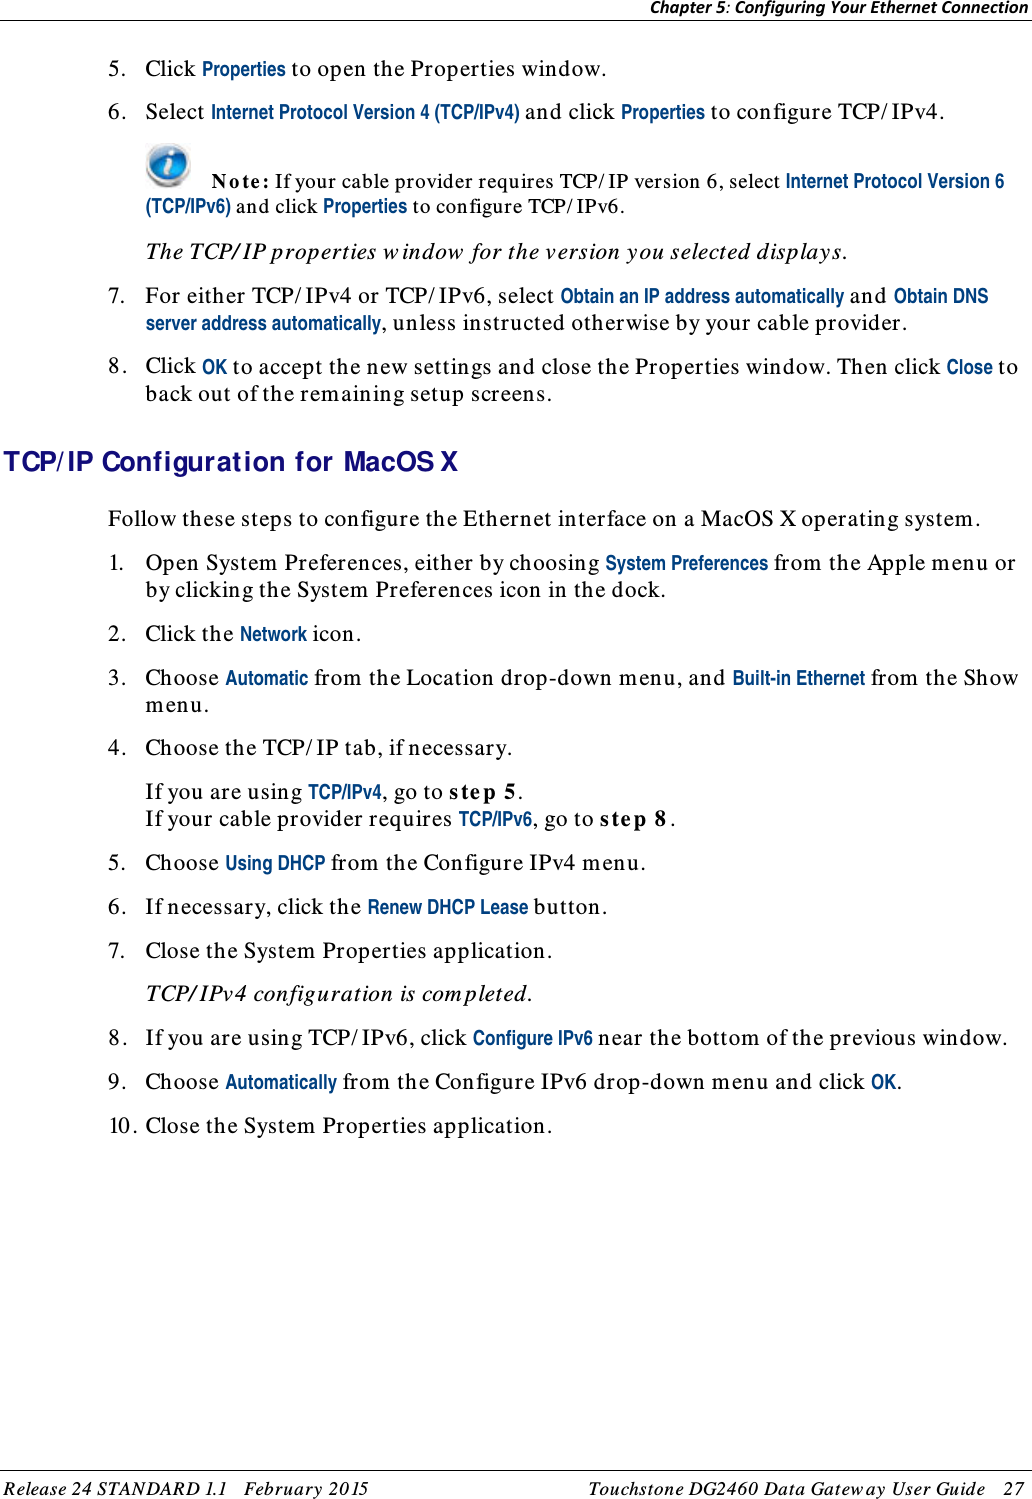 Chapter 5: Configuring Your Ethernet Connection  5. Click Properties to open the Properties window. 6. Select Internet Protocol Version 4 (TCP/IPv4) and click Properties to configure TCP/IPv4.  Note: If your cable provider requires TCP/IP version 6, select Internet Protocol Version 6 (TCP/IPv6) and click Properties to configure TCP/IPv6. The TCP/IP properties window for the version you selected displays. 7. For either TCP/IPv4 or TCP/IPv6, select Obtain an IP address automatically and Obtain DNS server address automatically, unless instructed otherwise by your cable provider. 8. Click OK to accept the new settings and close the Properties window. Then click Close to back out of the remaining setup screens.   TCP/IP Configuration for MacOS X Follow these steps to configure the Ethernet interface on a MacOS X operating system. 1. Open System Preferences, either by choosing System Preferences from the Apple menu or by clicking the System Preferences icon in the dock. 2. Click the Network icon. 3. Choose Automatic from the Location drop-down menu, and Built-in Ethernet from the Show menu. 4. Choose the TCP/IP tab, if necessary. If you are using TCP/IPv4, go to step 5. If your cable provider requires TCP/IPv6, go to step 8. 5. Choose Using DHCP from the Configure IPv4 menu. 6. If necessary, click the Renew DHCP Lease button. 7. Close the System Properties application. TCP/IPv4 configuration is completed. 8. If you are using TCP/IPv6, click Configure IPv6 near the bottom of the previous window. 9. Choose Automatically from the Configure IPv6 drop-down menu and click OK. 10. Close the System Properties application.  Release 24 STANDARD 1.1    February 2015 Touchstone DG2460 Data Gateway User Guide    27  